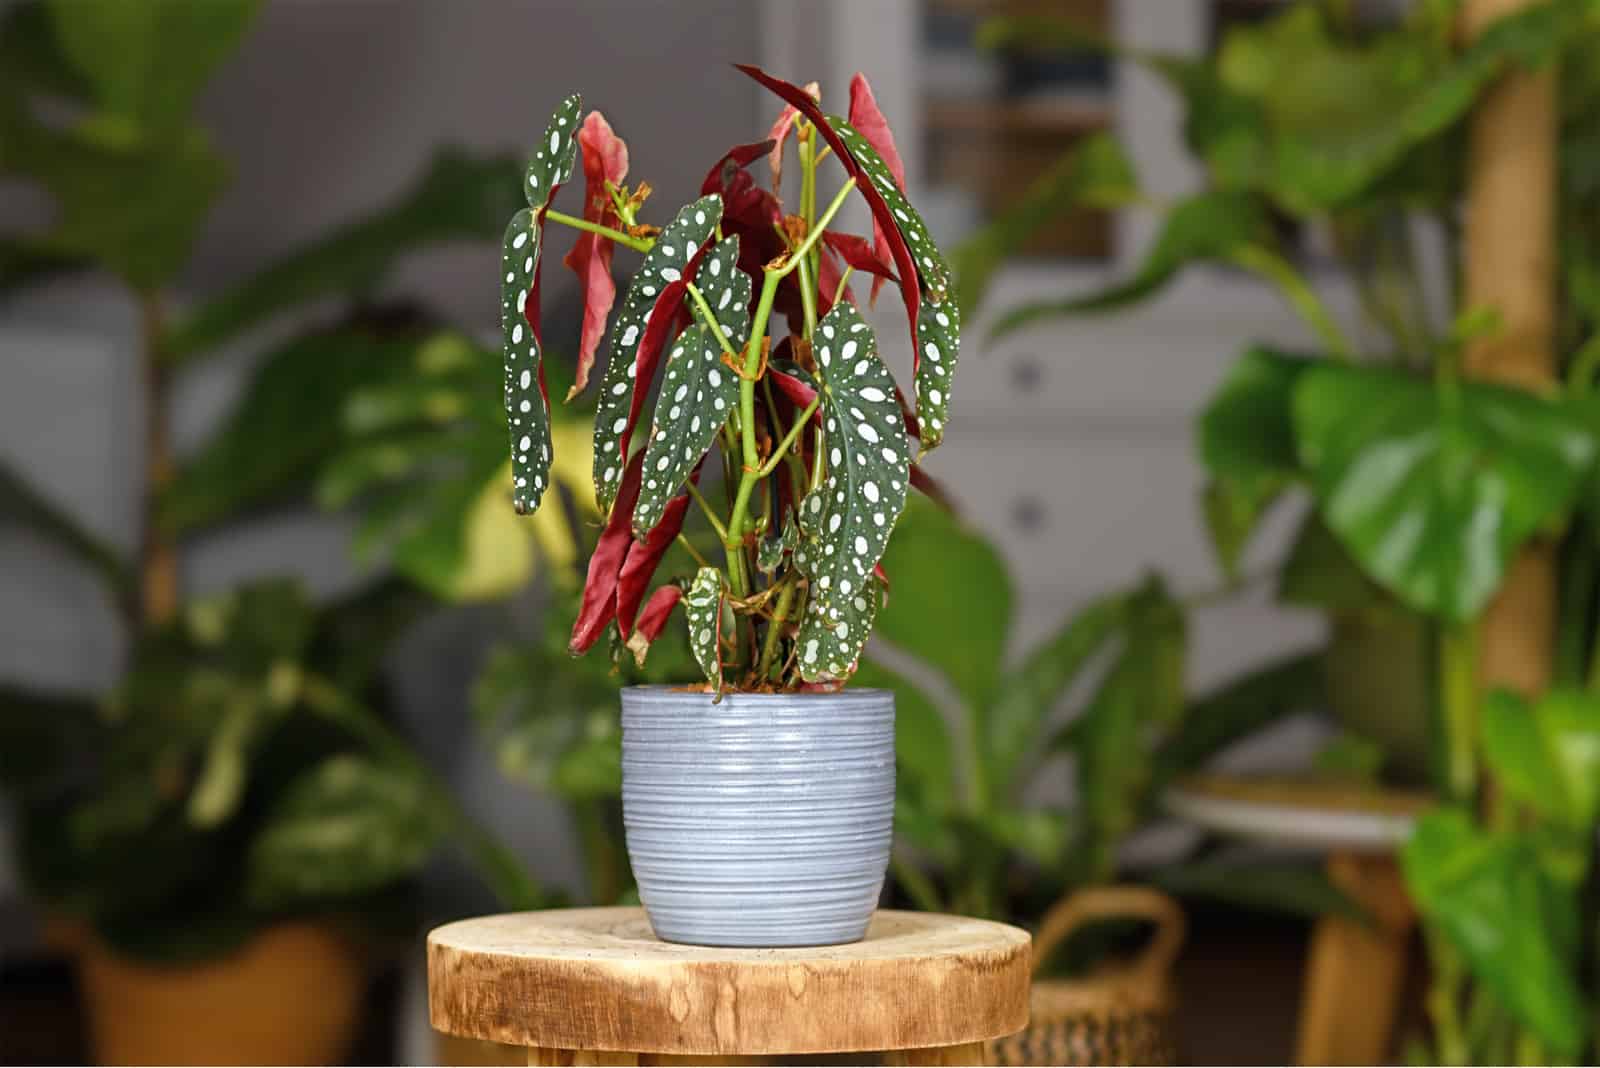 Begonia Maculata in pot on table